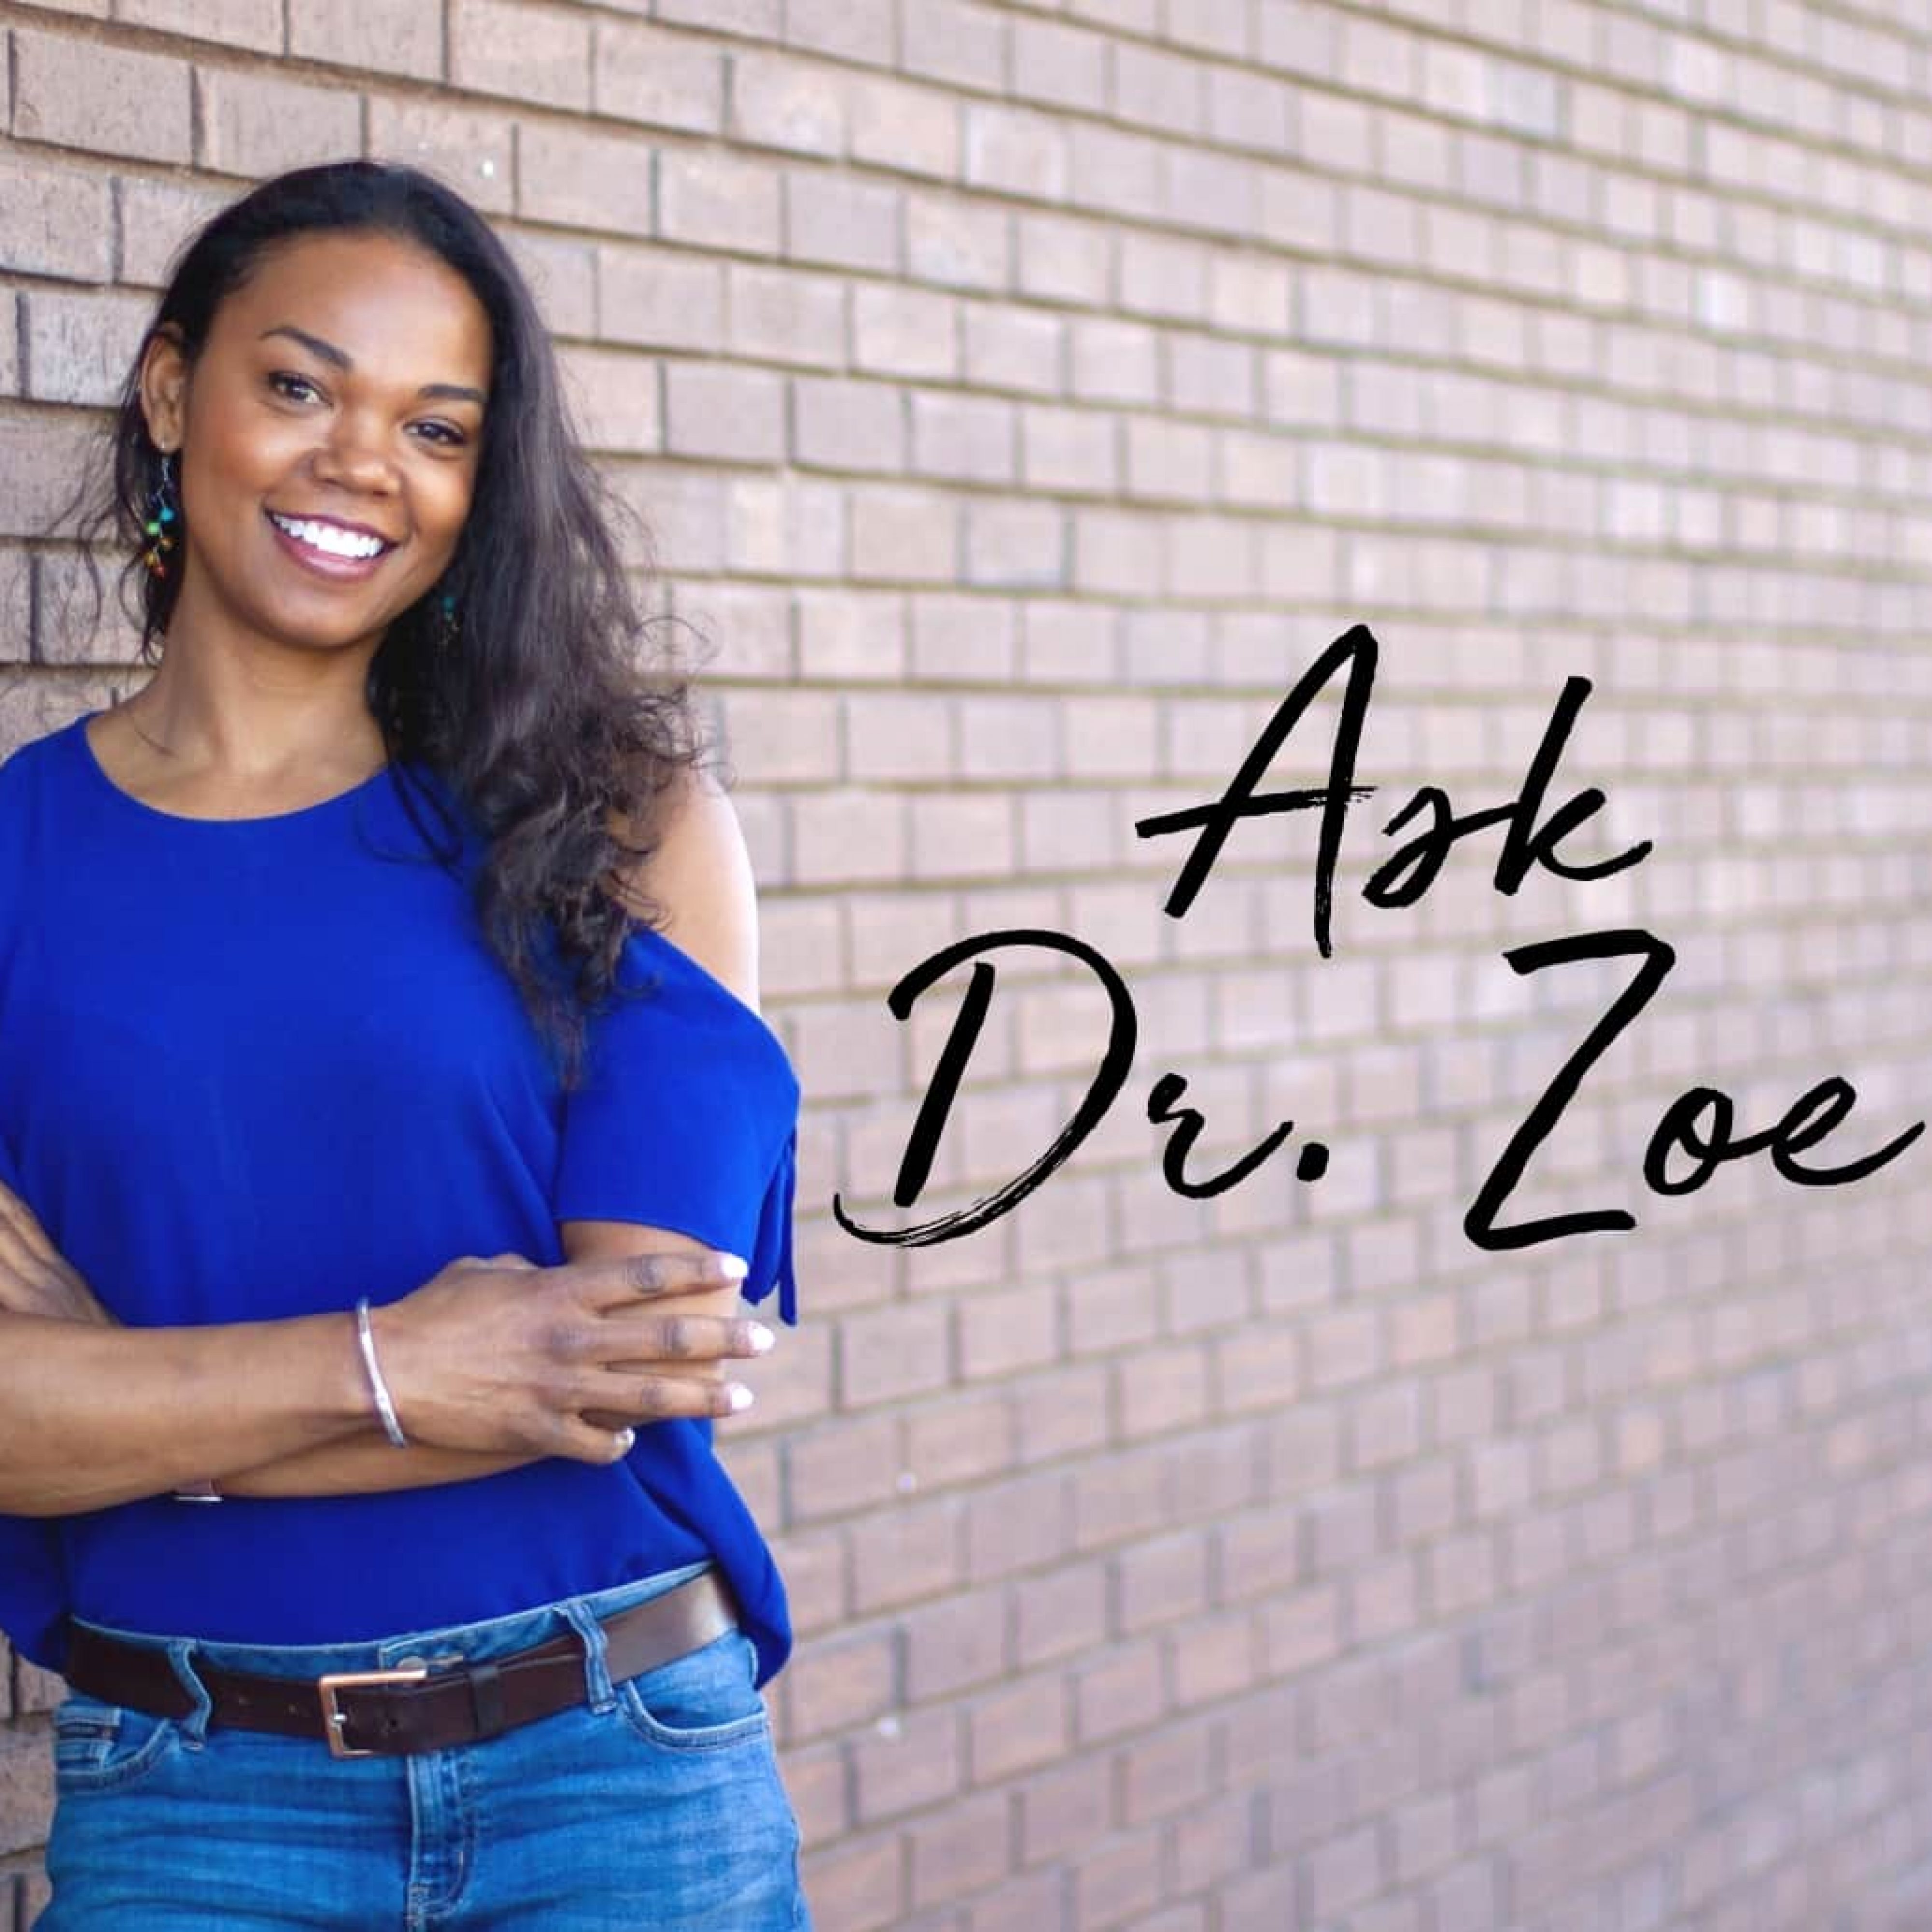 Ask Dr. Zoe - I Don't Desire Sex—What's Wrong?